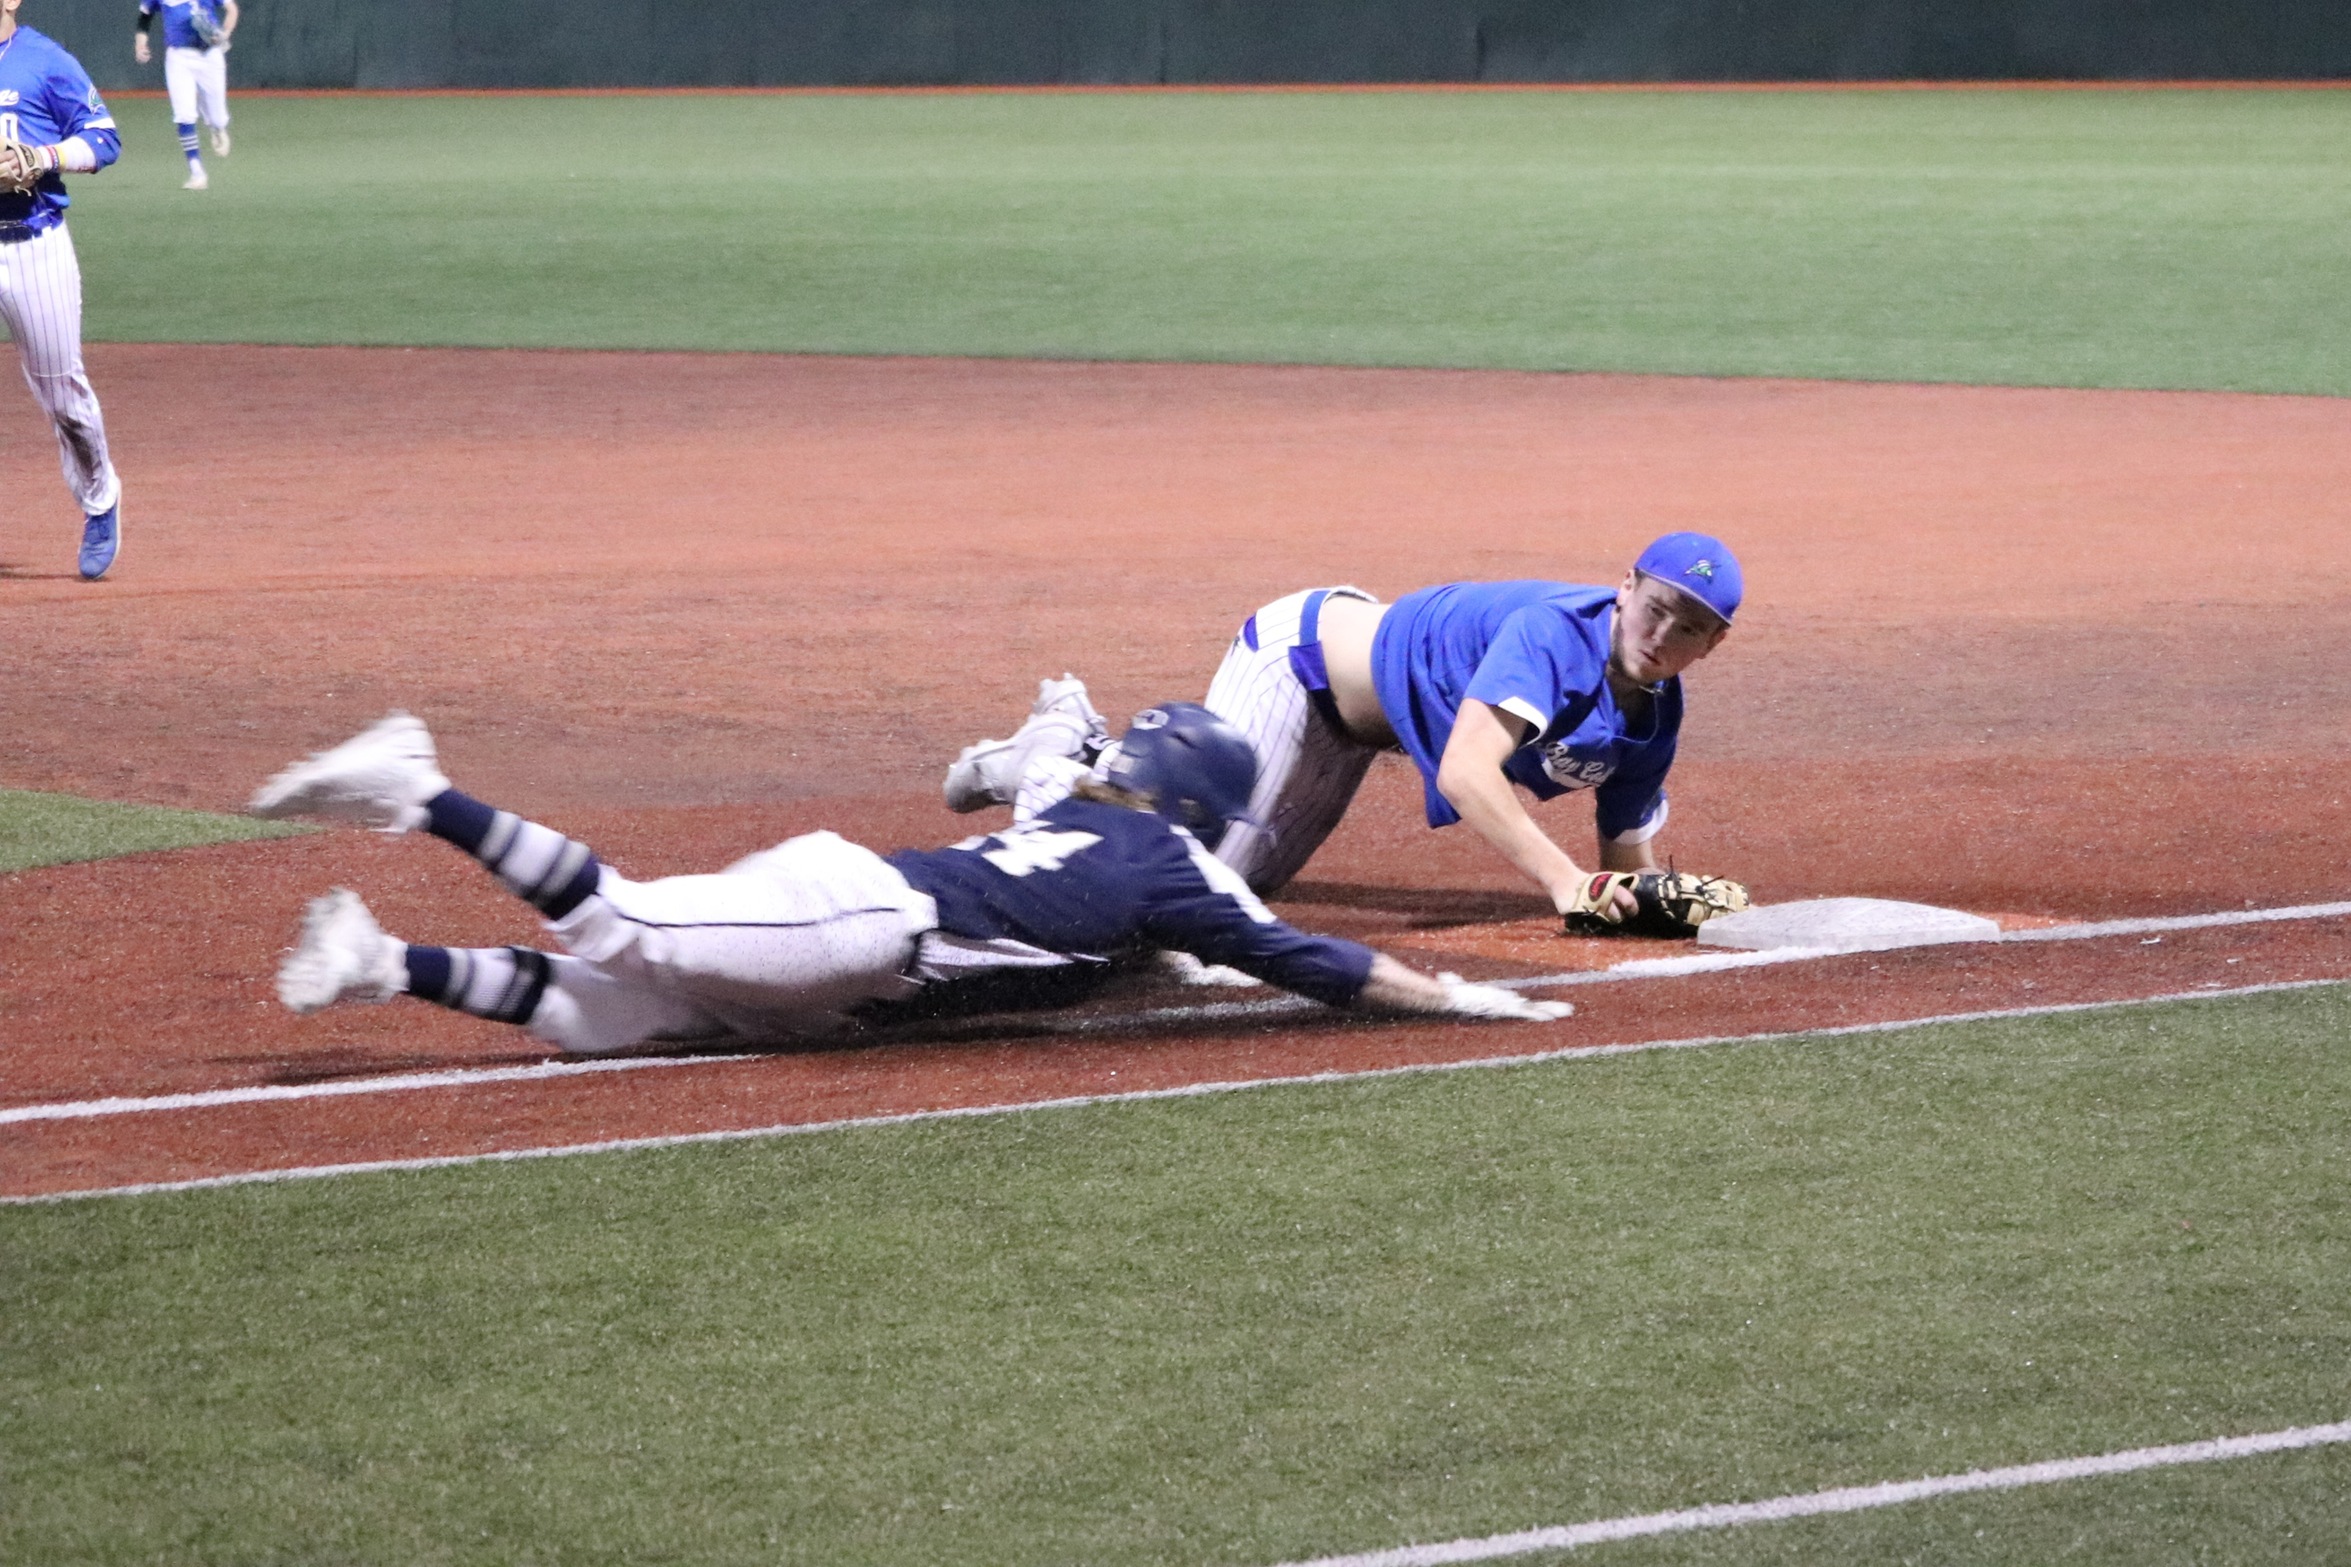 Jared Crow dives back to the bag, just beating a sliding runner to first for the out